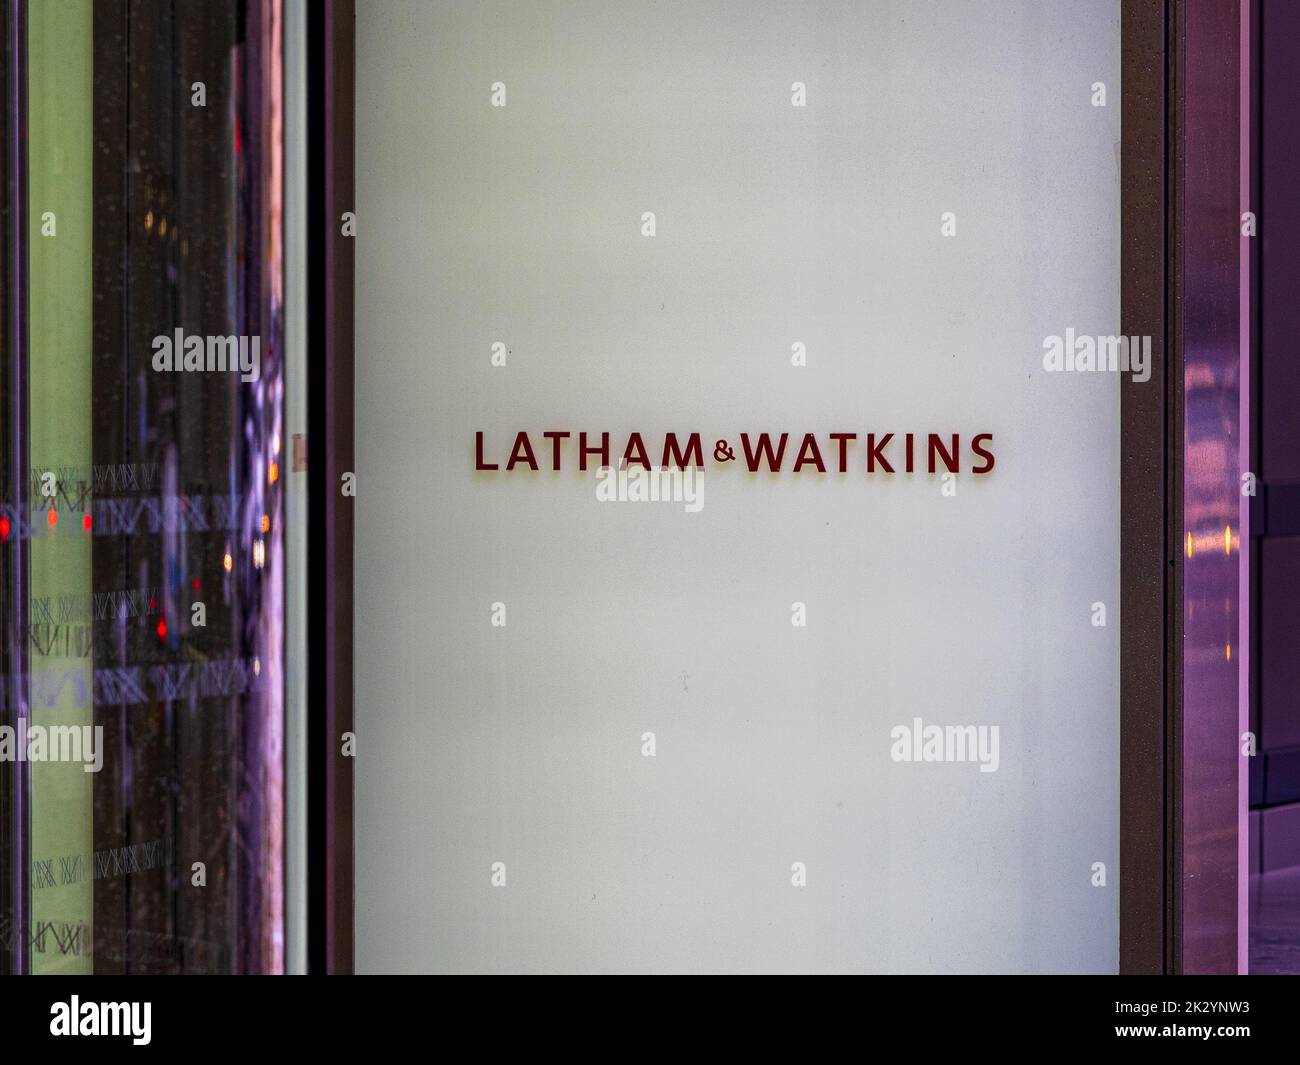 Latham & Watkins LLP London - Entrance to the Latham and Watkins Law Firm in the City of London Financial District. Stock Photo